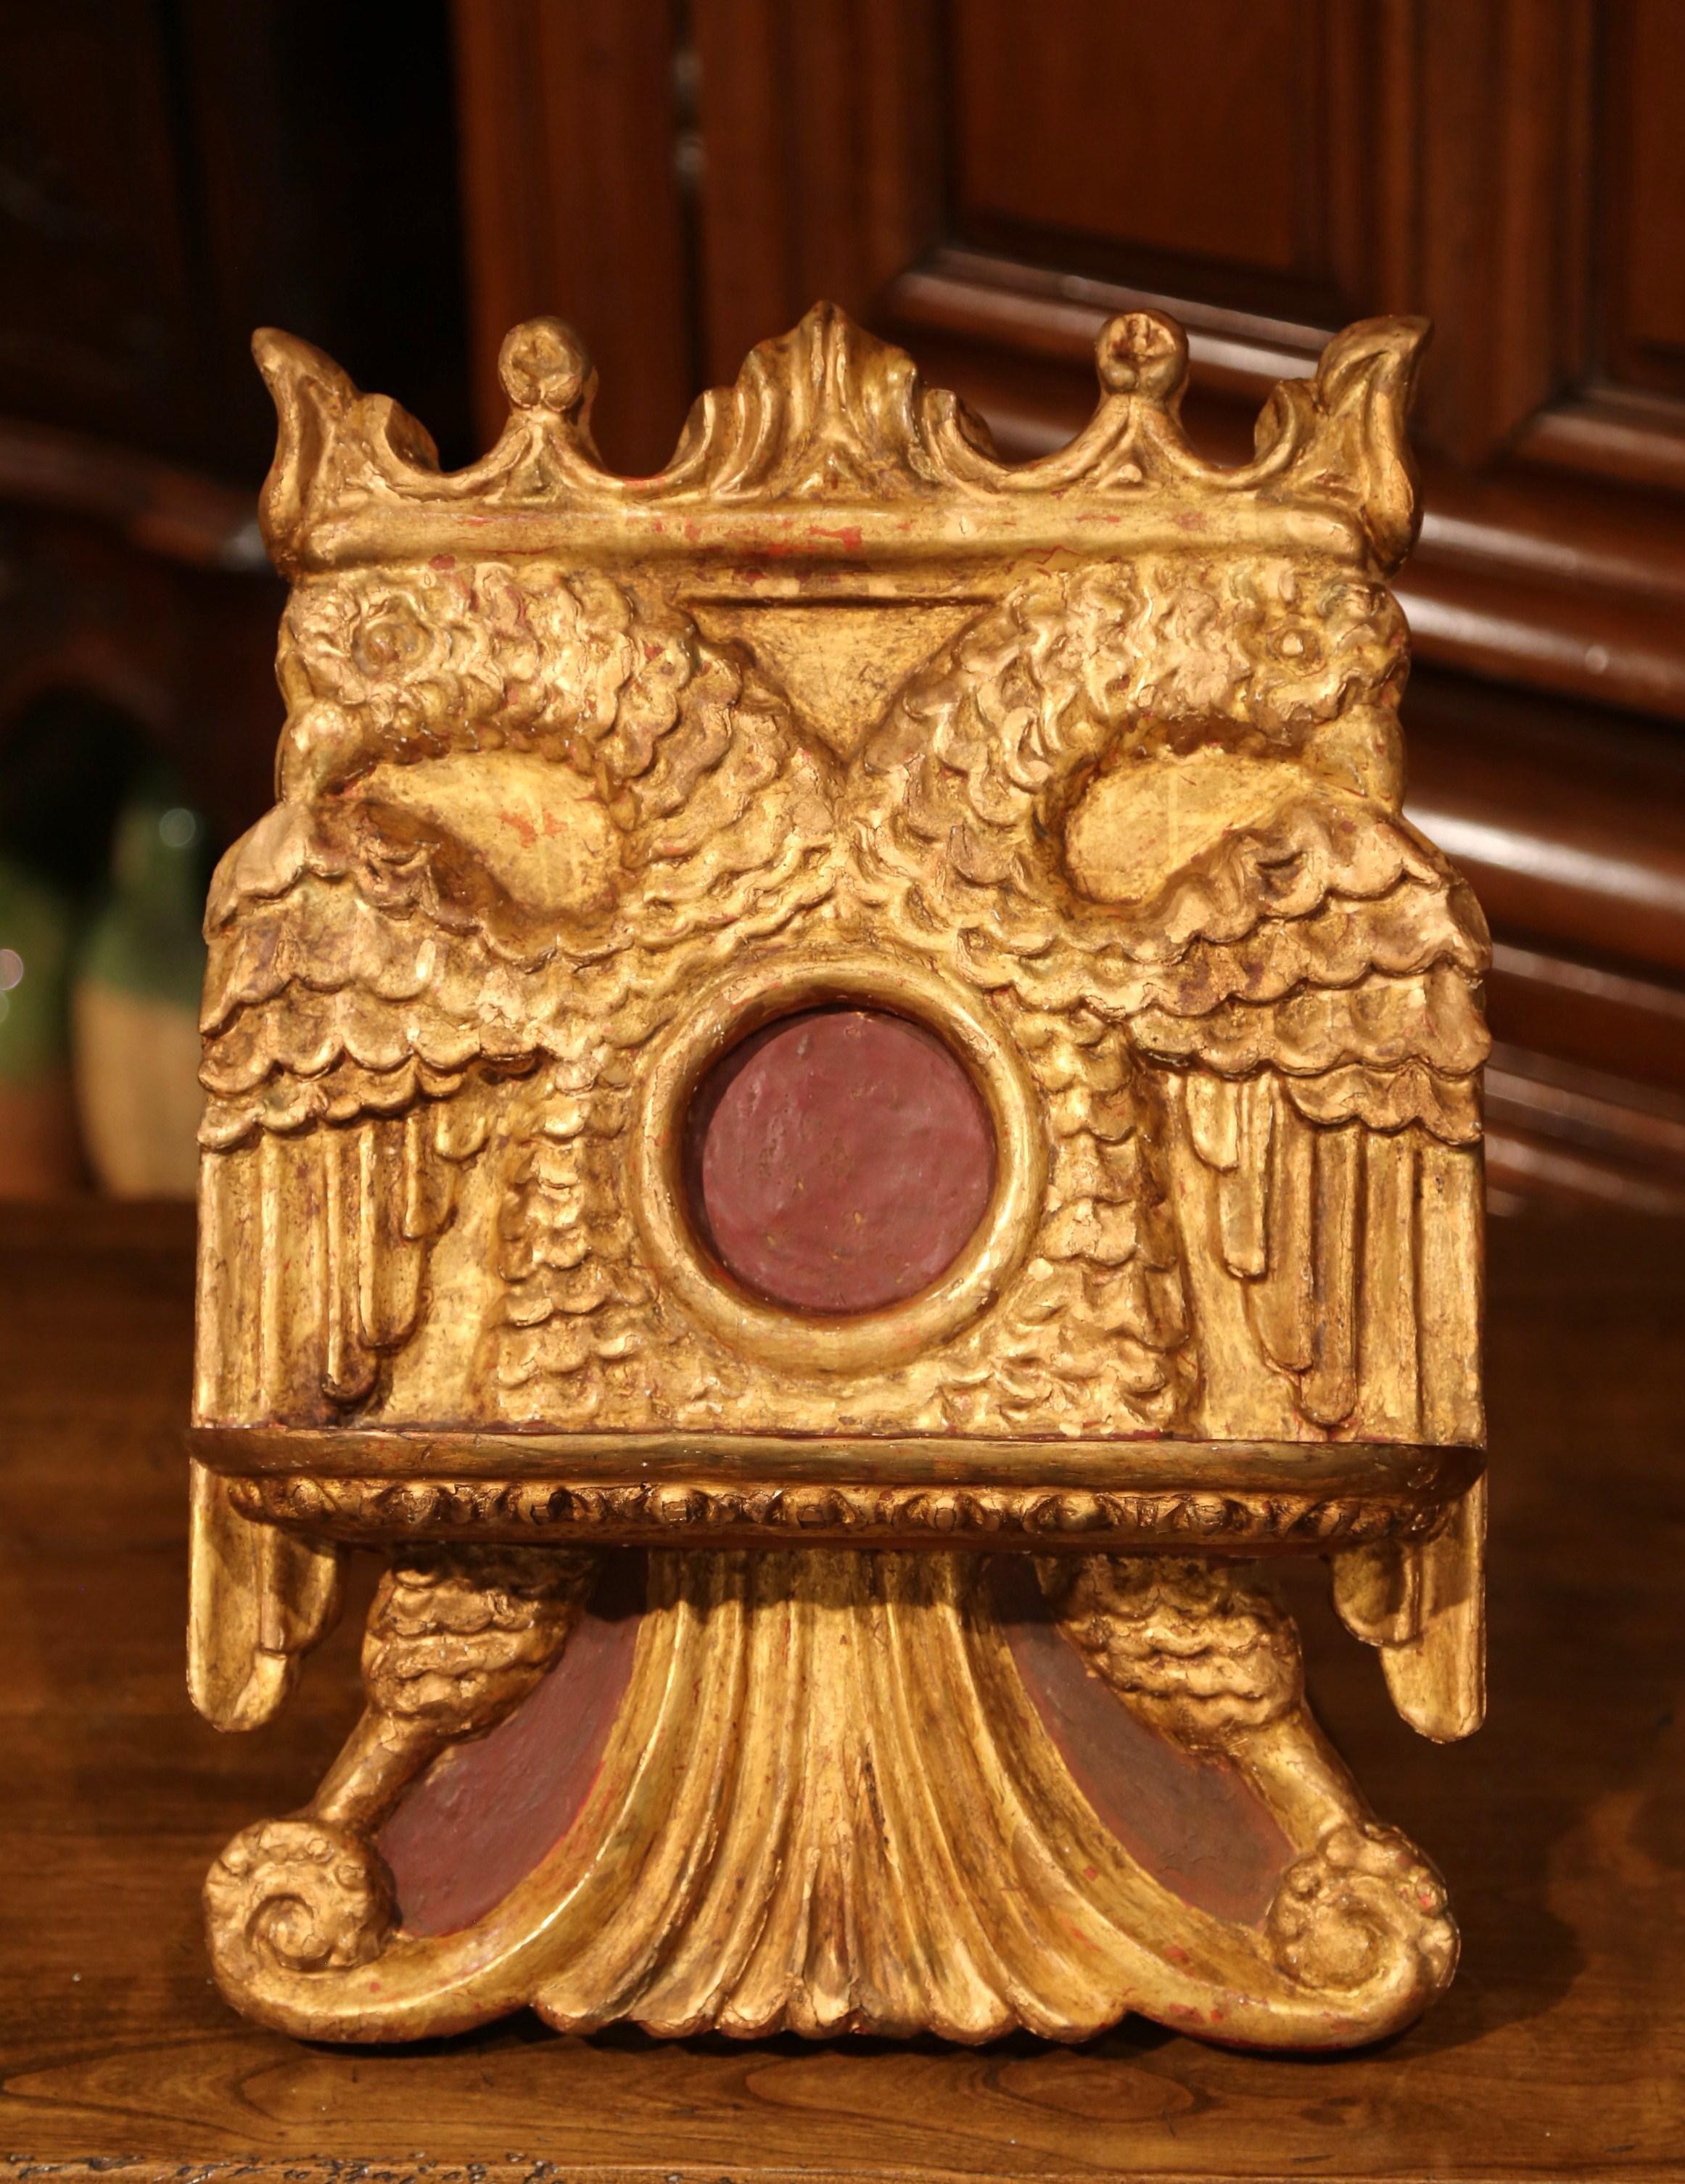 Place your Bible, music sheet or a recipe book on this antique, rococo book stand. Crafted in Spain, circa 1860, the decorative lectern sits on small tripod and features hand carved motifs on the front. The book stand is carved with a center